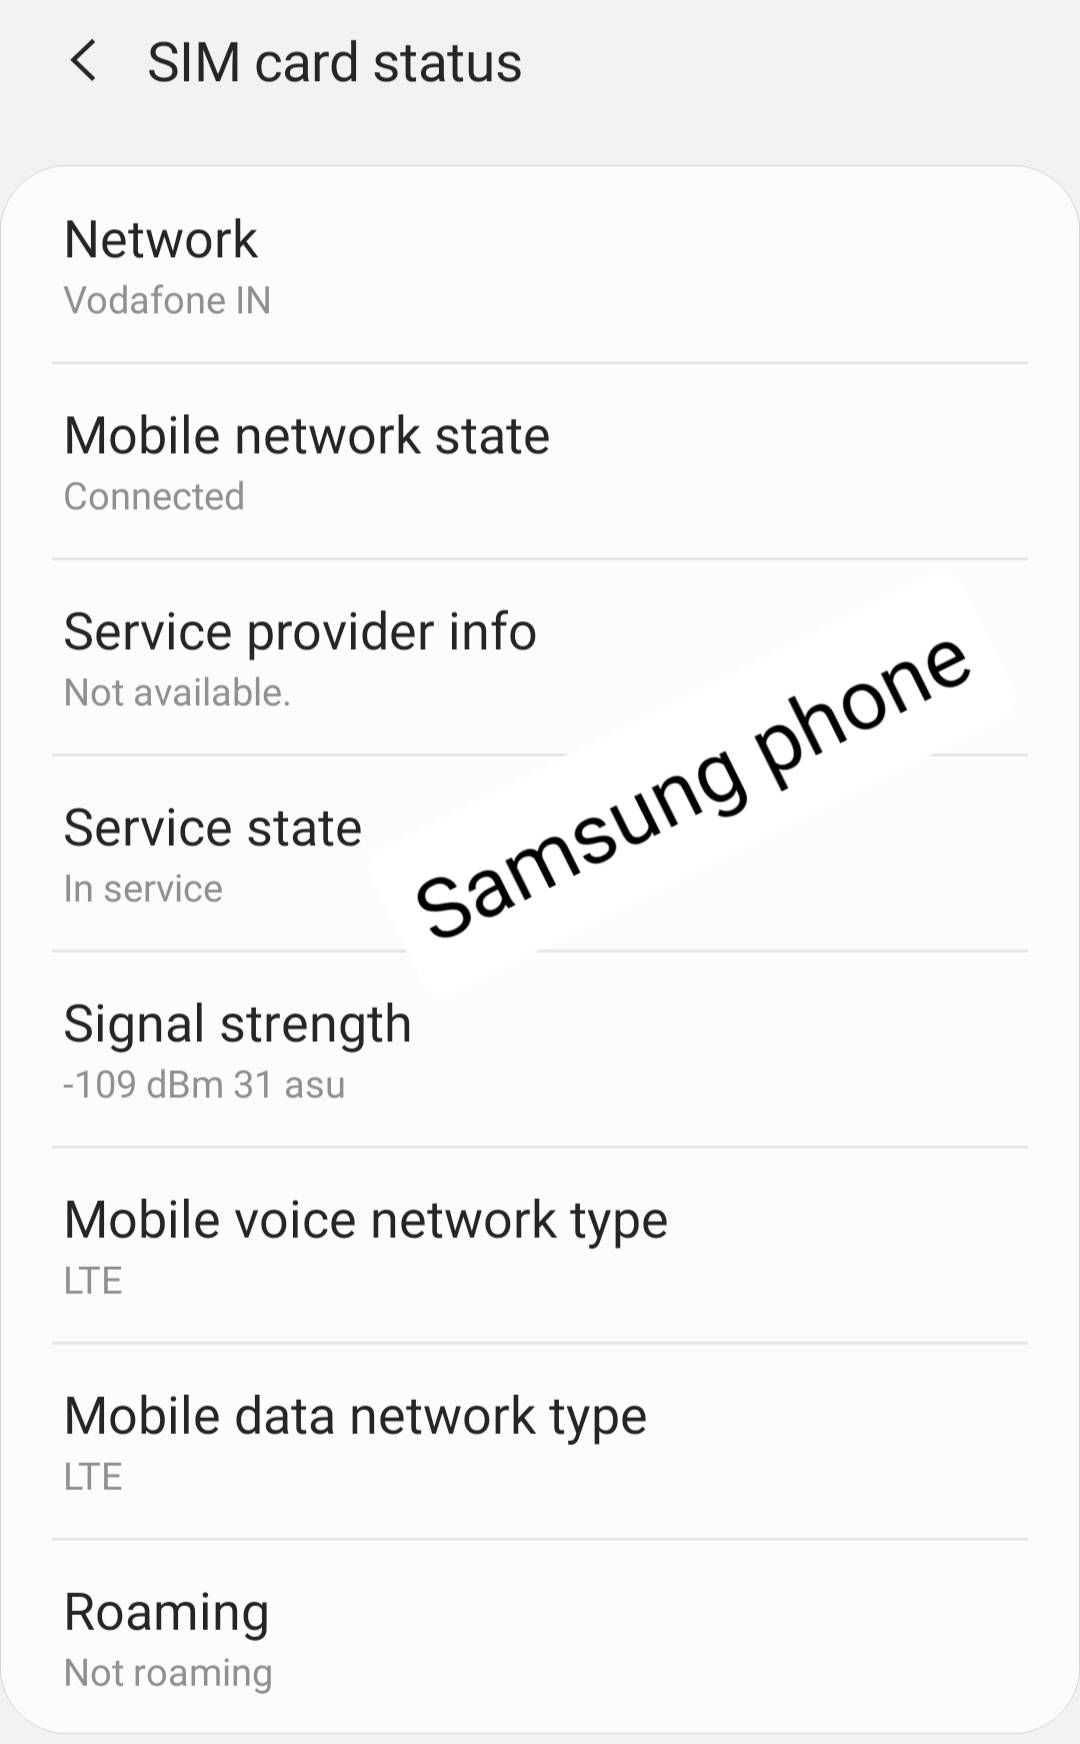 Worst network coverage on Samsung phone A50 - Samsung Members